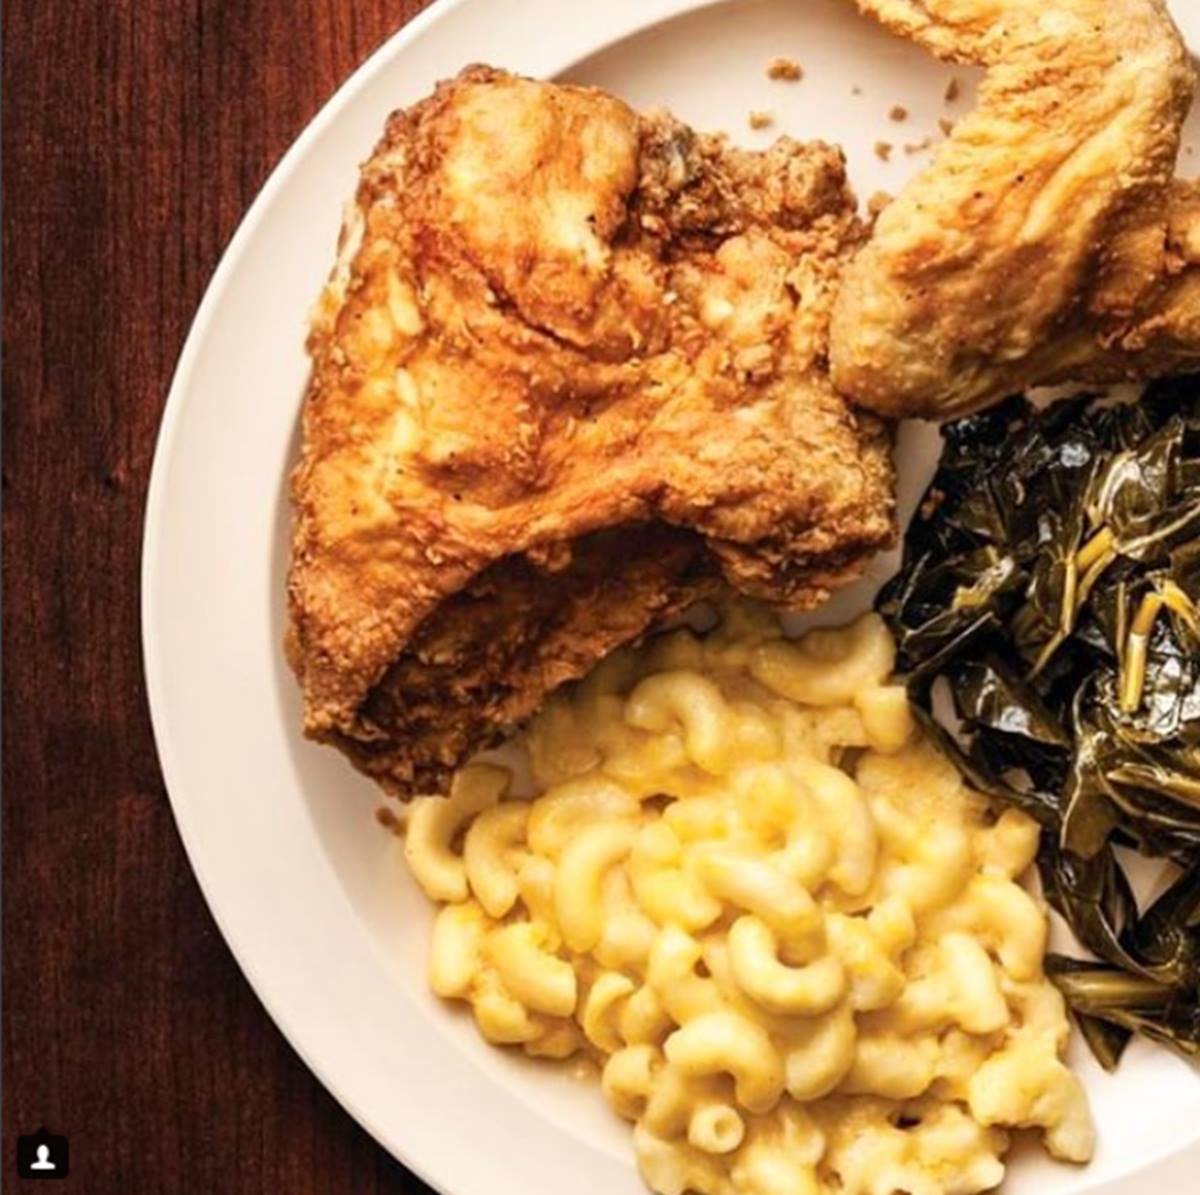 Fried chicken, collards, and mac and cheese from Busy Bee Cafe in Vine City Atlanta